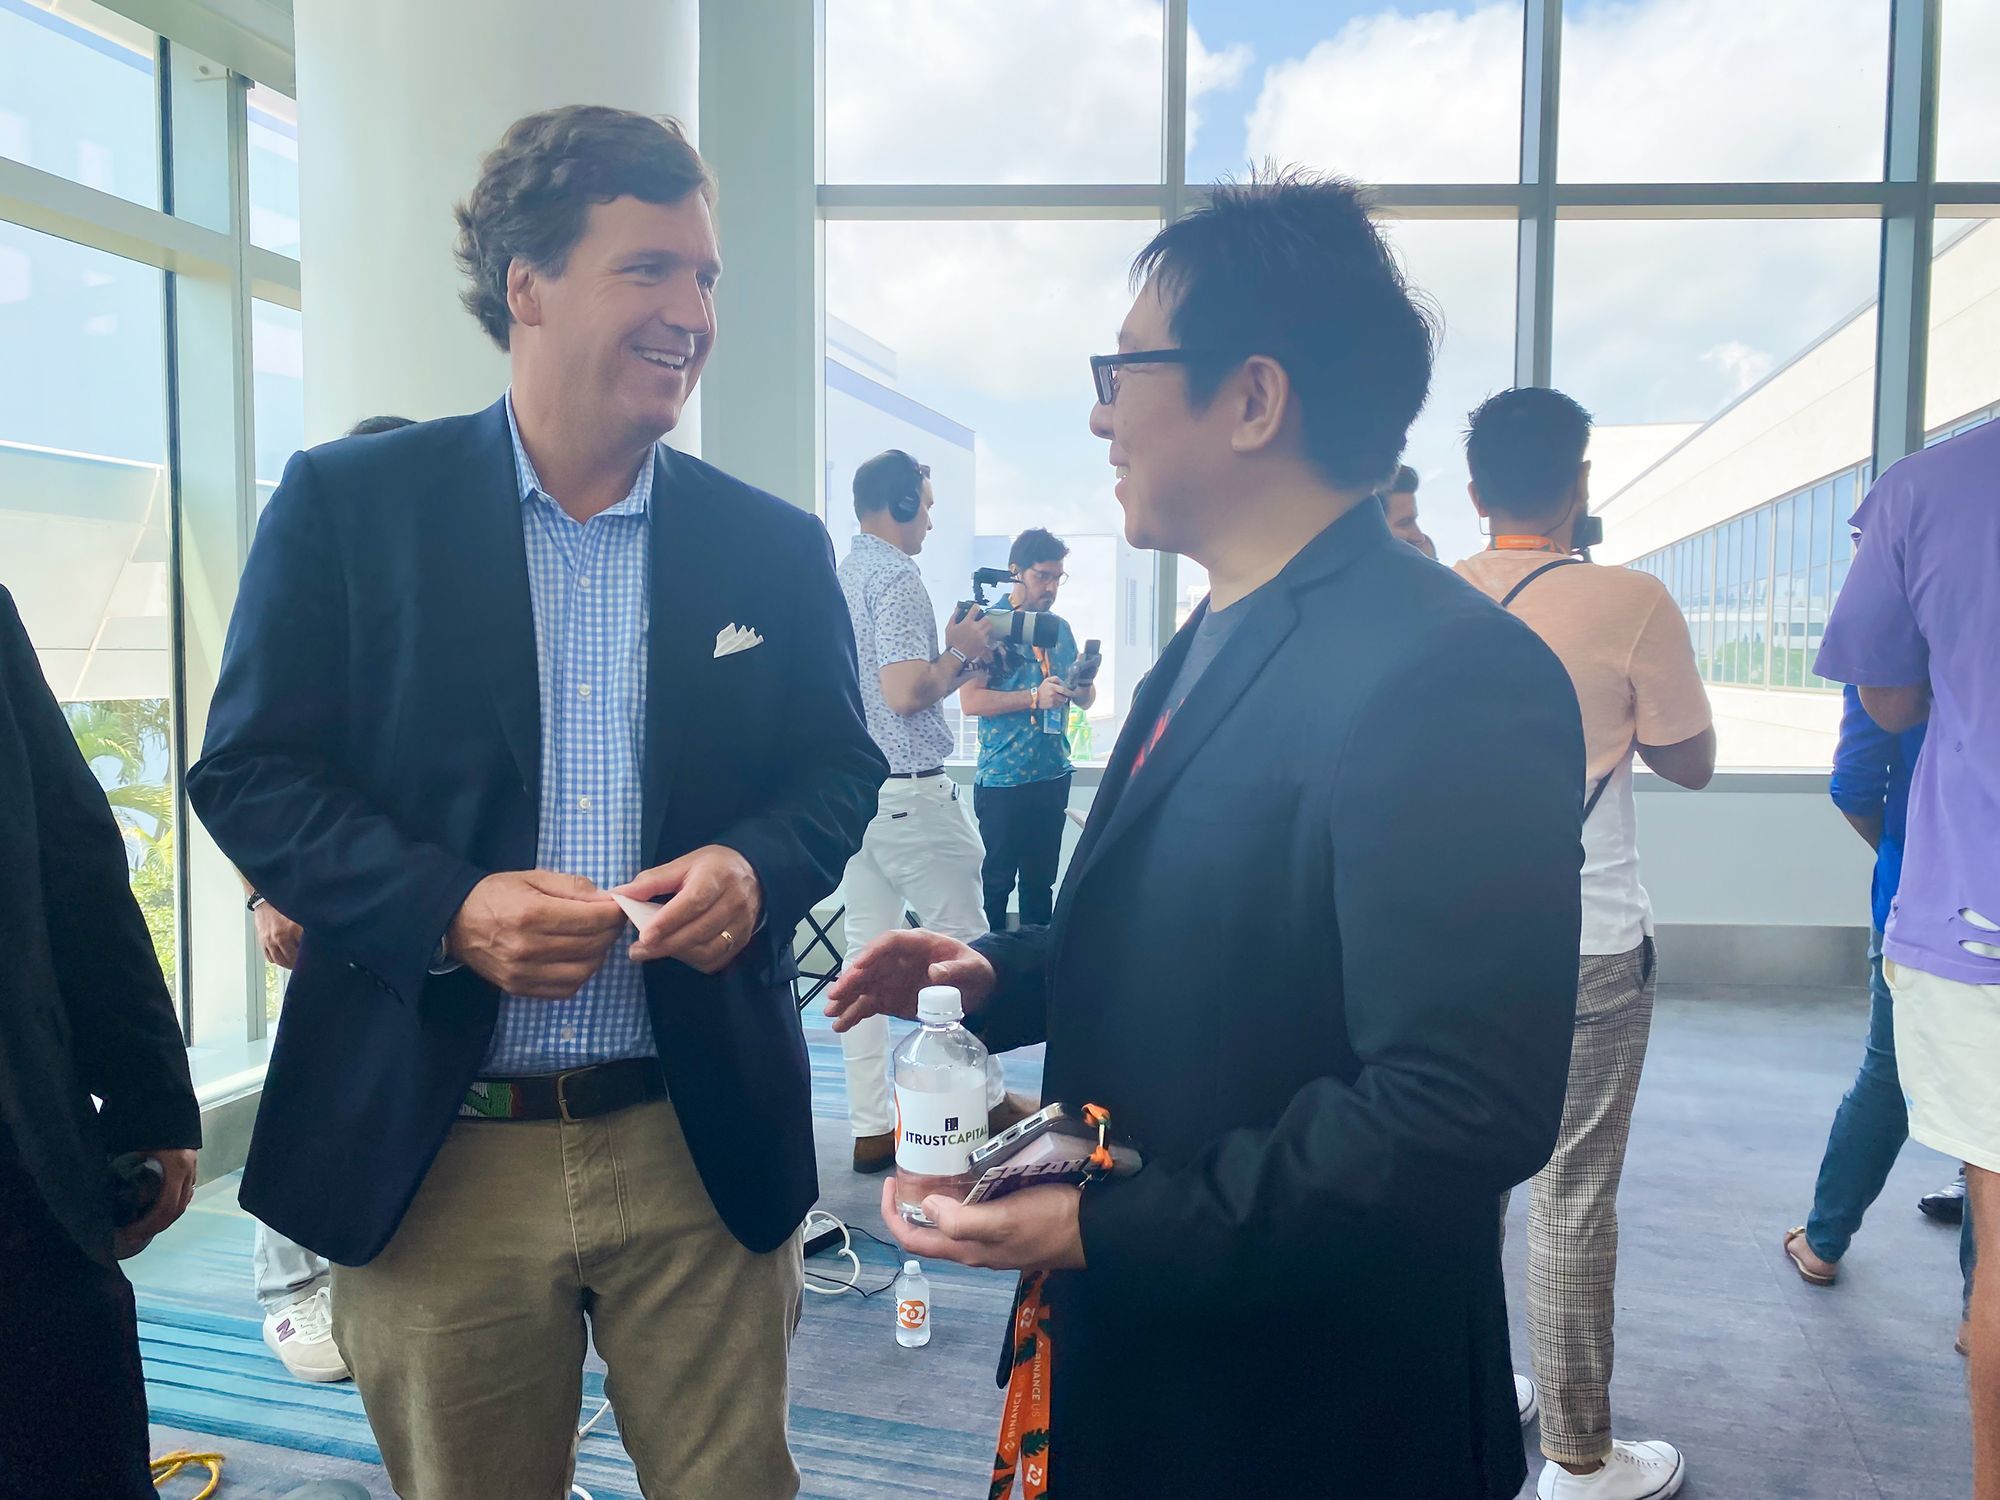 Samson Mow exchanging business cards with Tucker Carlson at Bitcoin 2022 in Miami